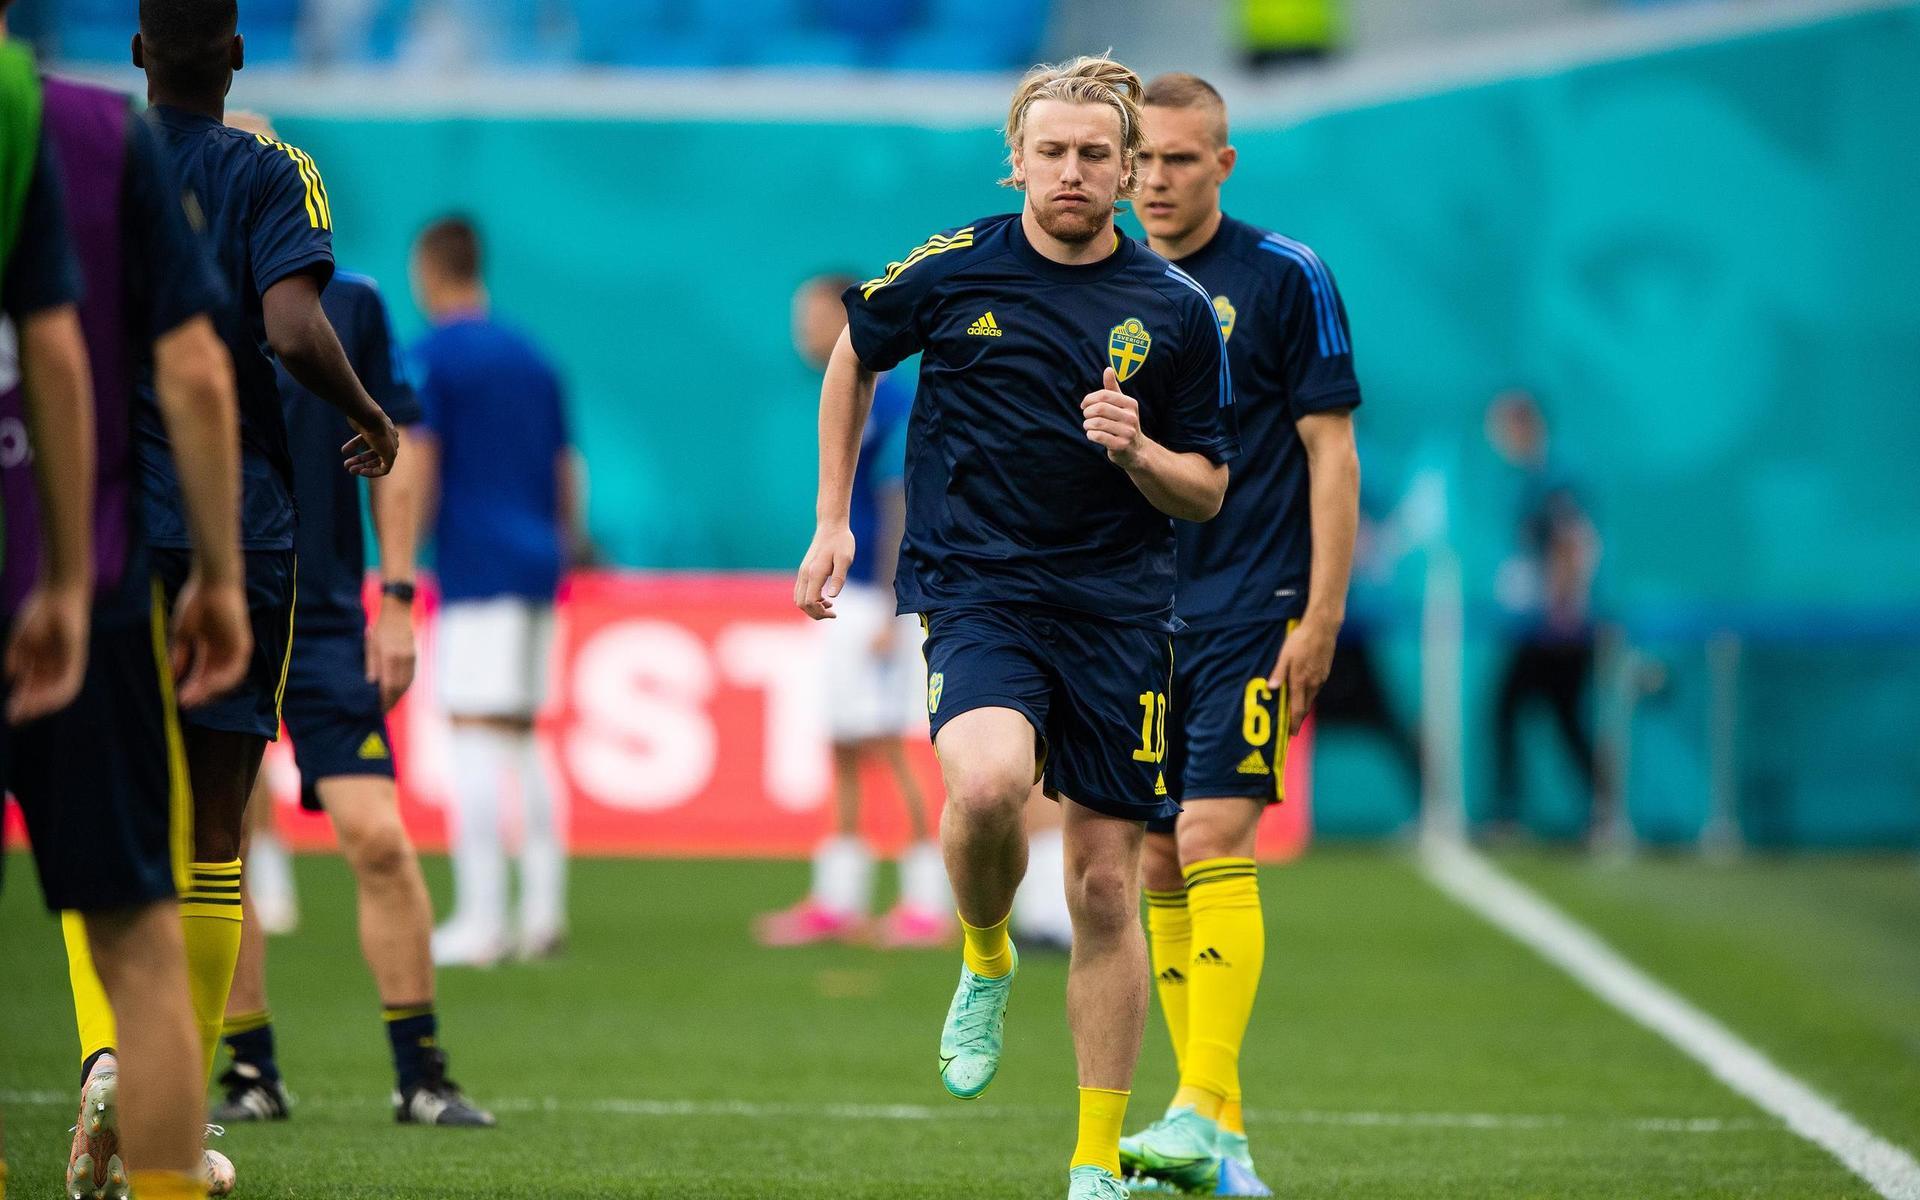 Emil Forsberg of Sweden during warm up ahead of the UEFA Euro 2020 Football Championship match between Sweden and Slovakia on June 18, 2021 in Saint Petersburg.